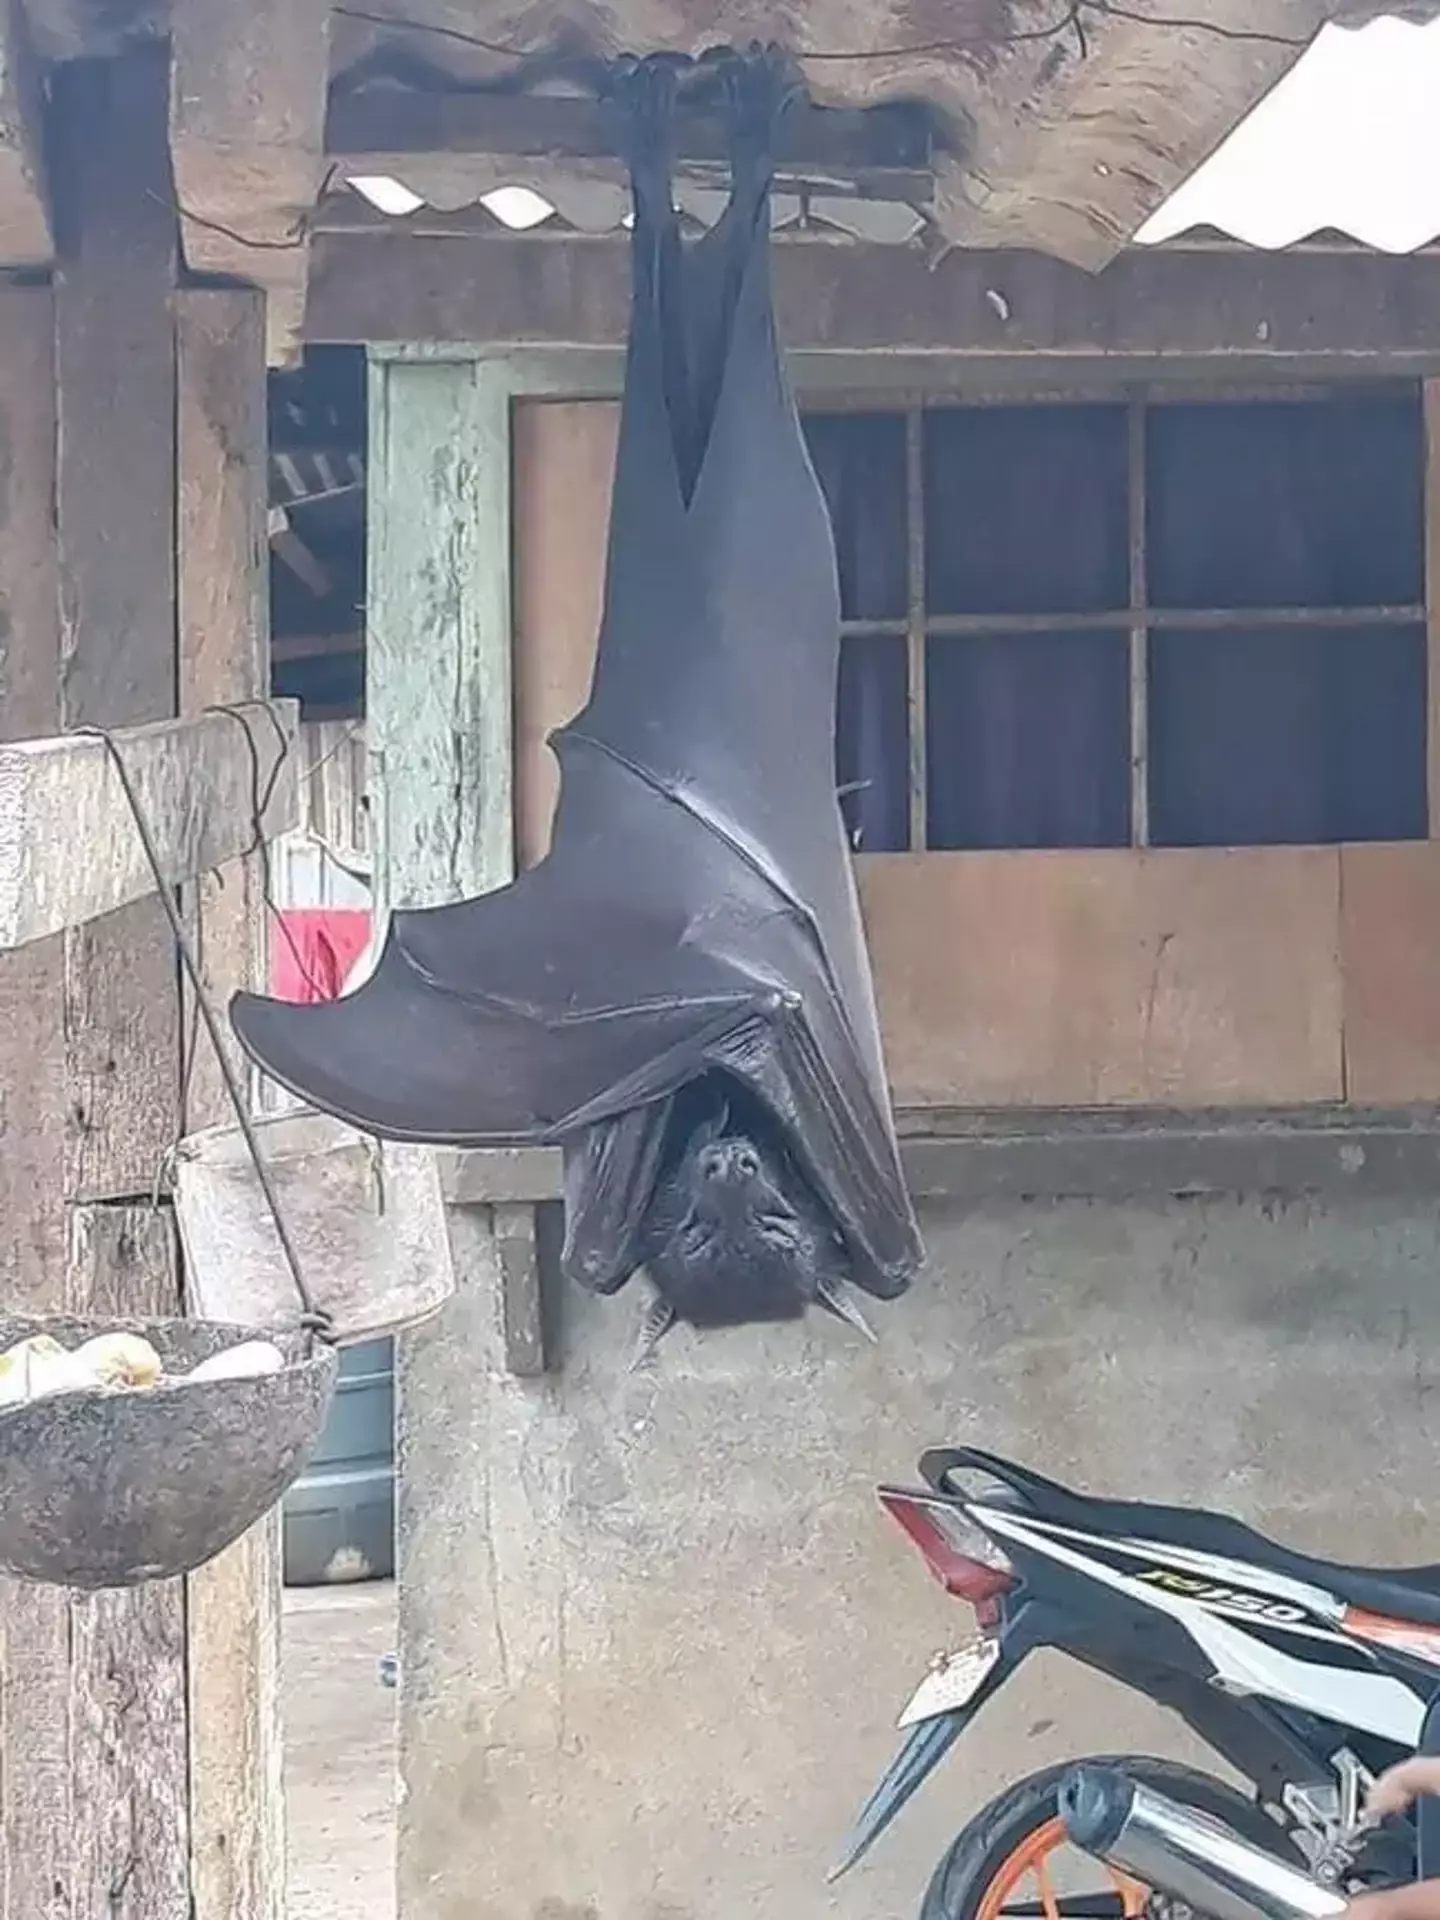 The bat, at first, appears to be about five foot tall.